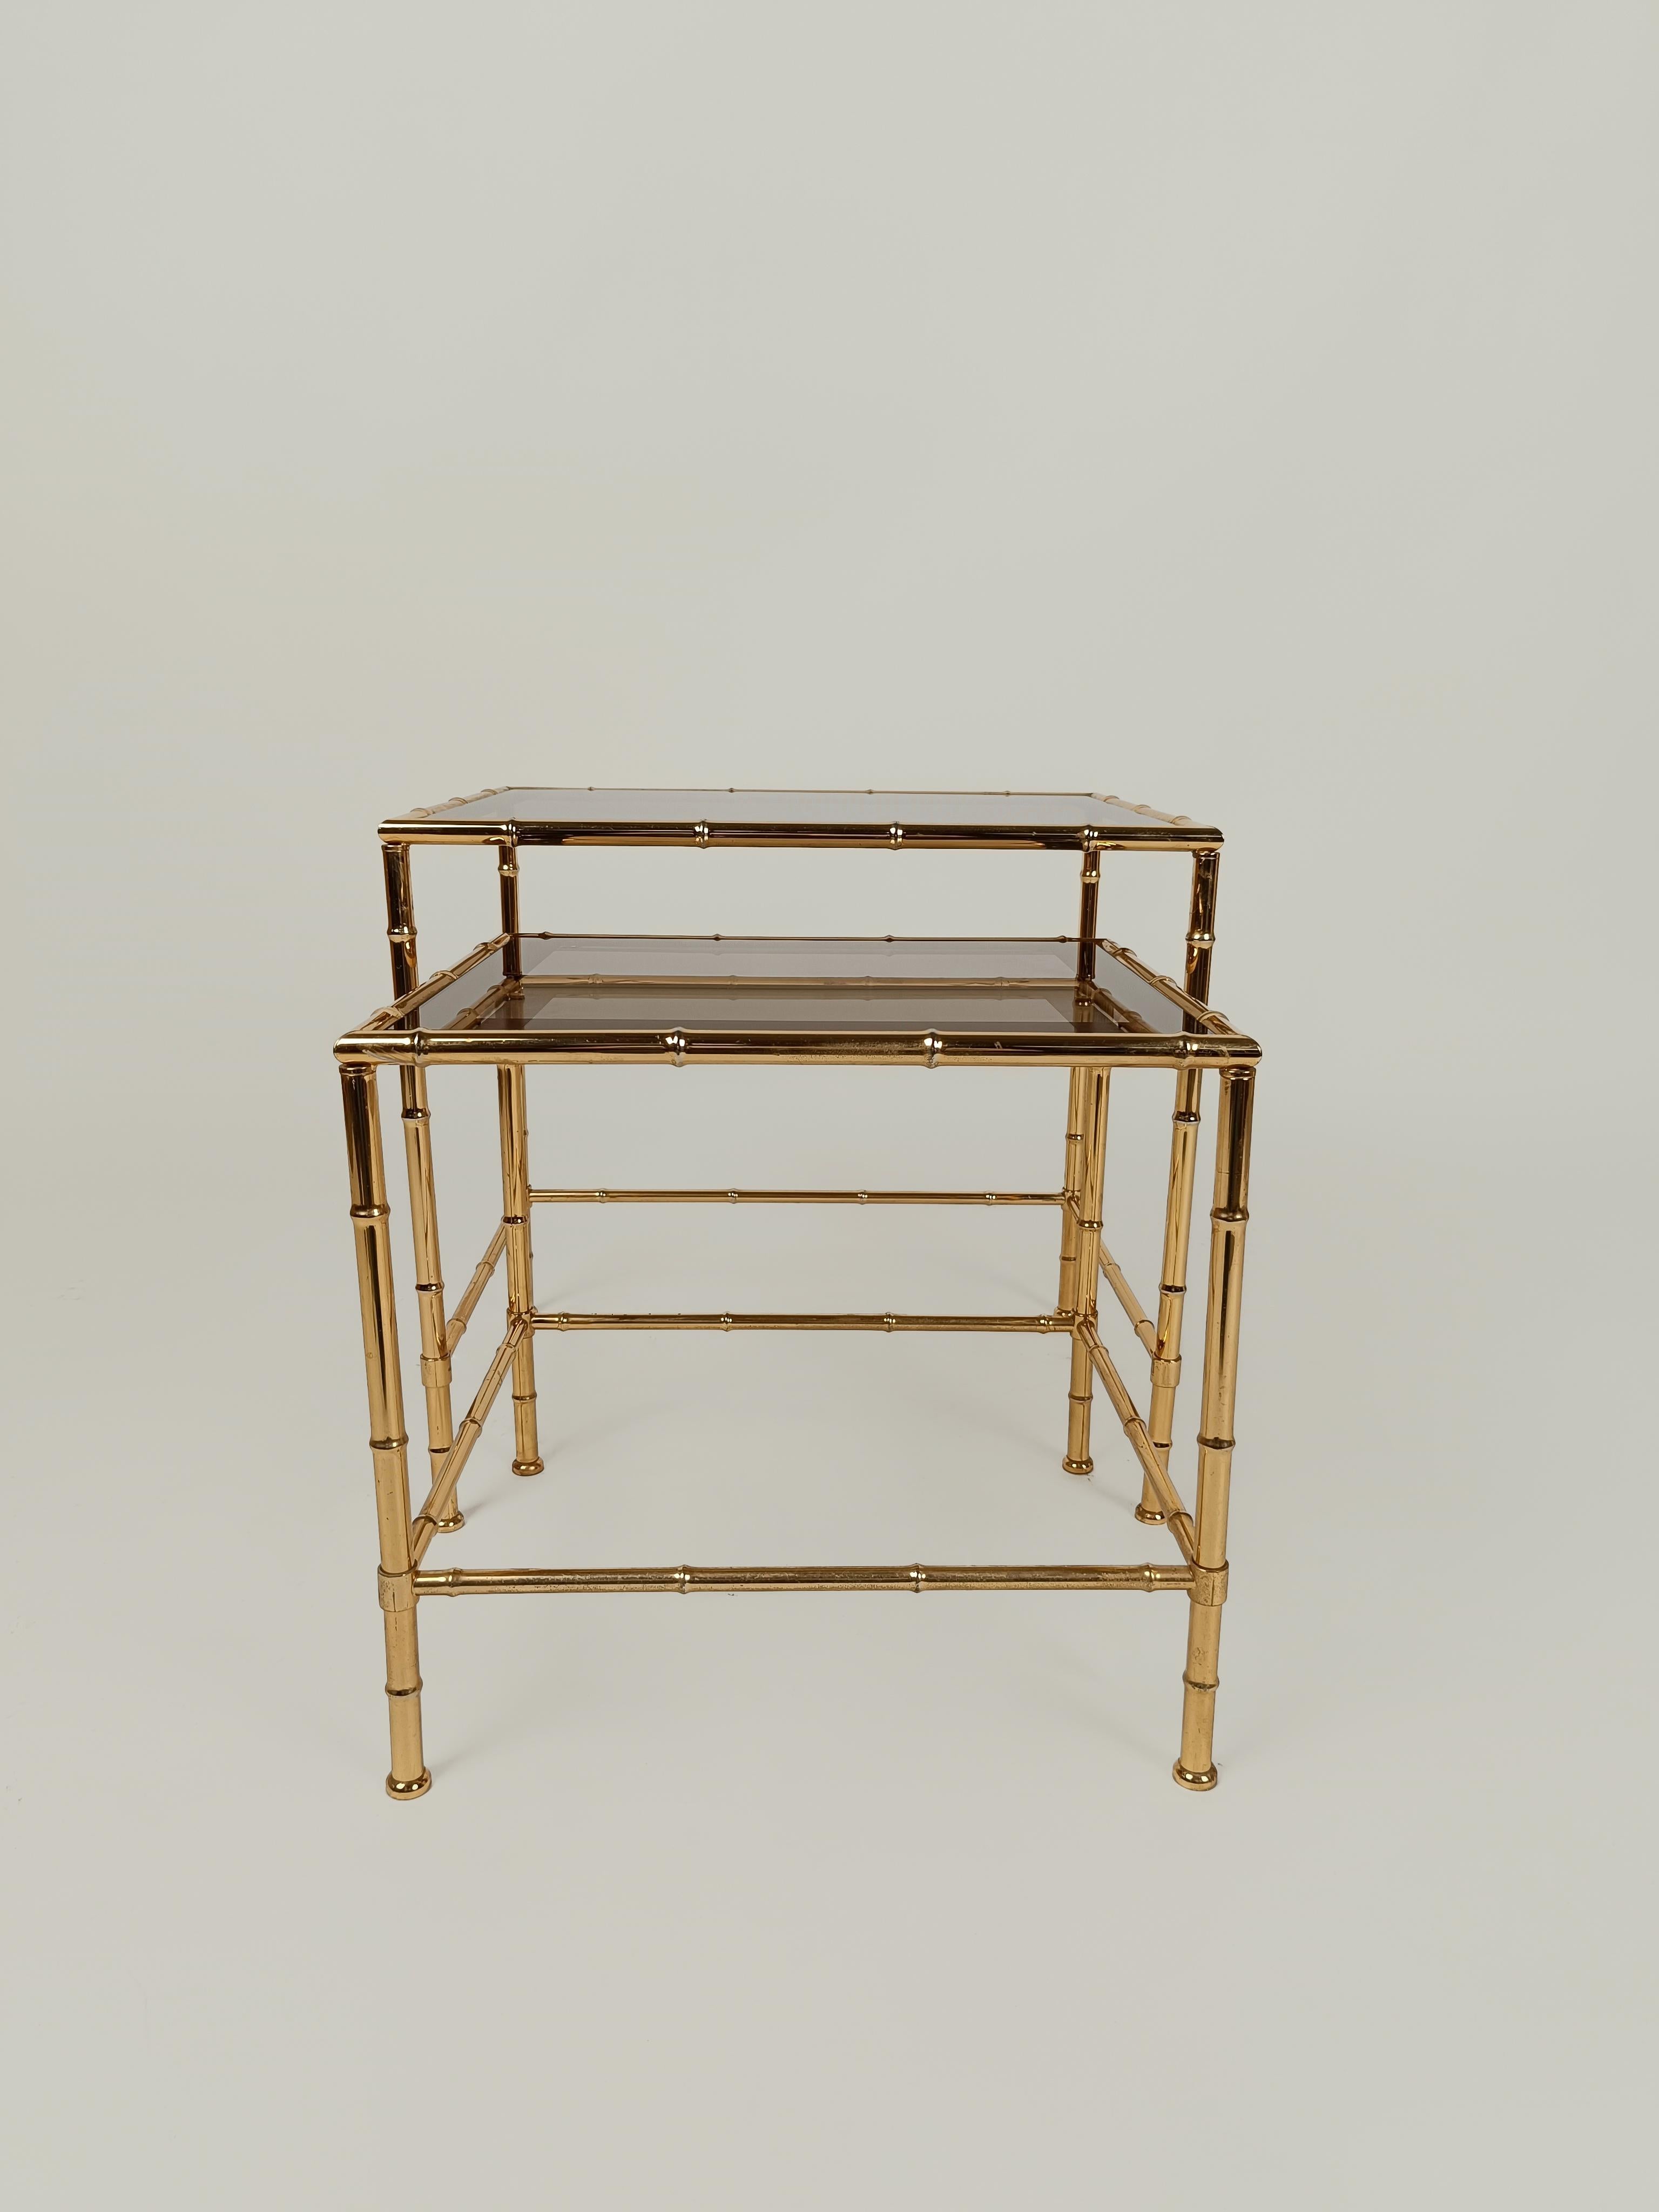 Italiano Midcentury Nesting Table in Brass Faux Bamboo and Fumè Mirrored Glass For Sale 1